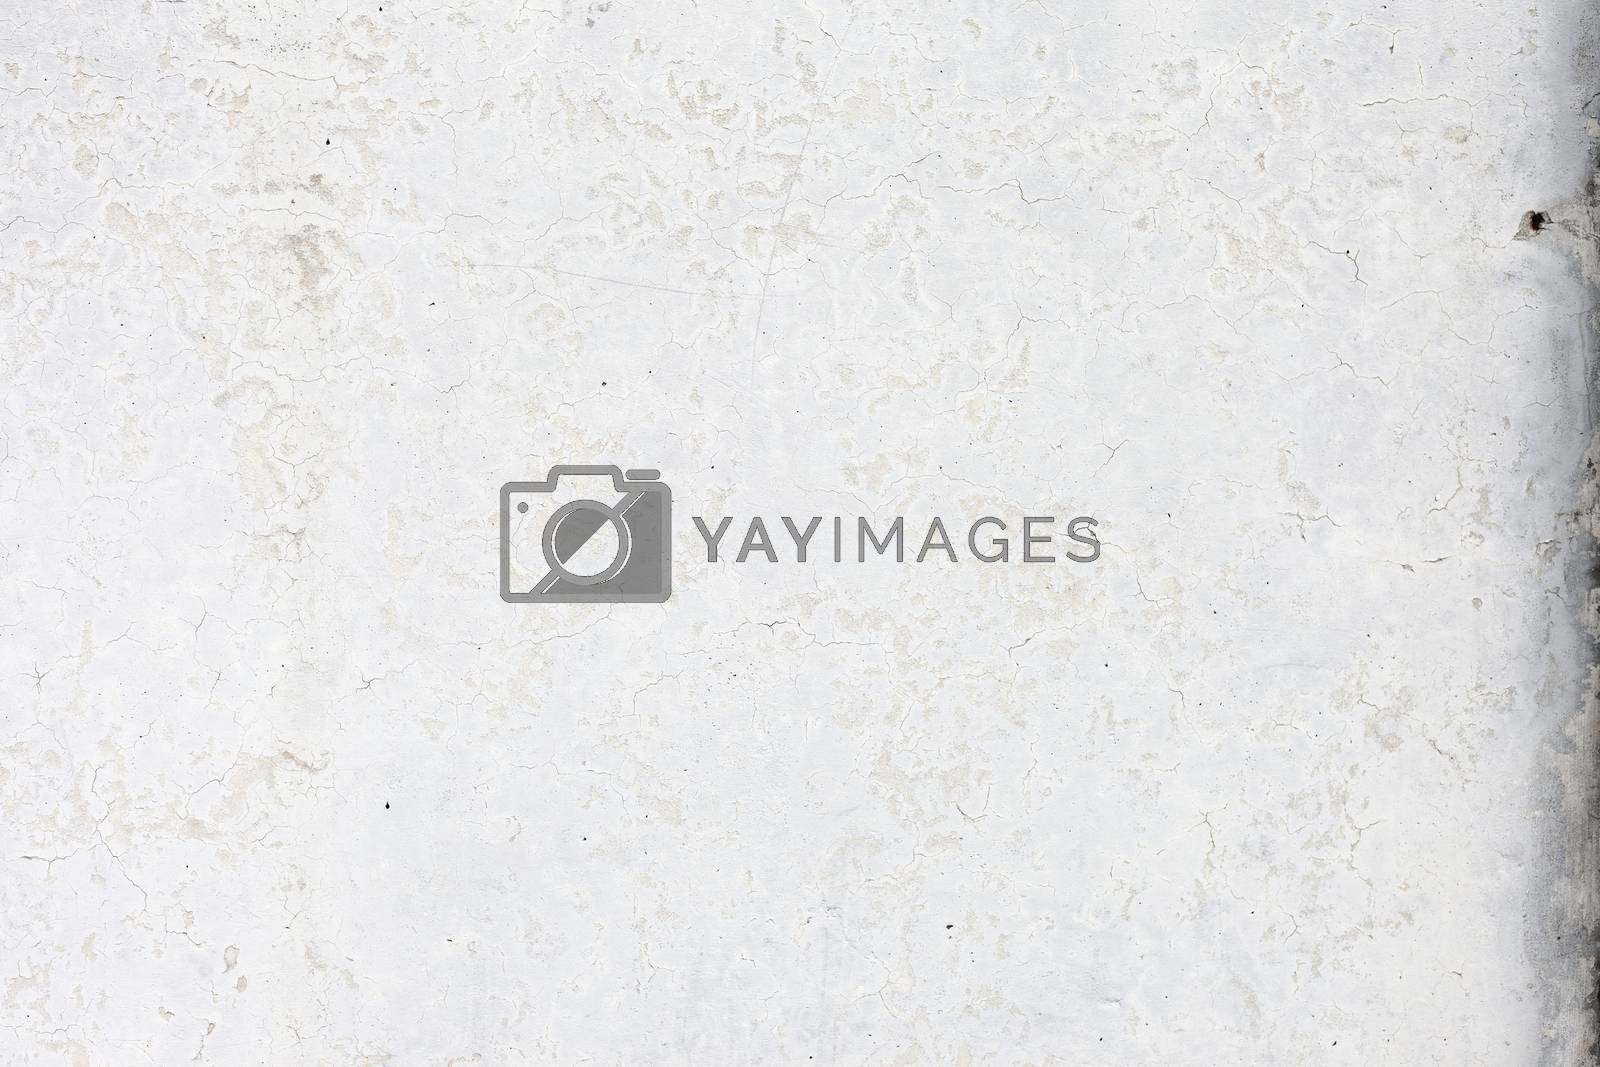 Royalty free image of Grungy white concrete wall background by H2Oshka